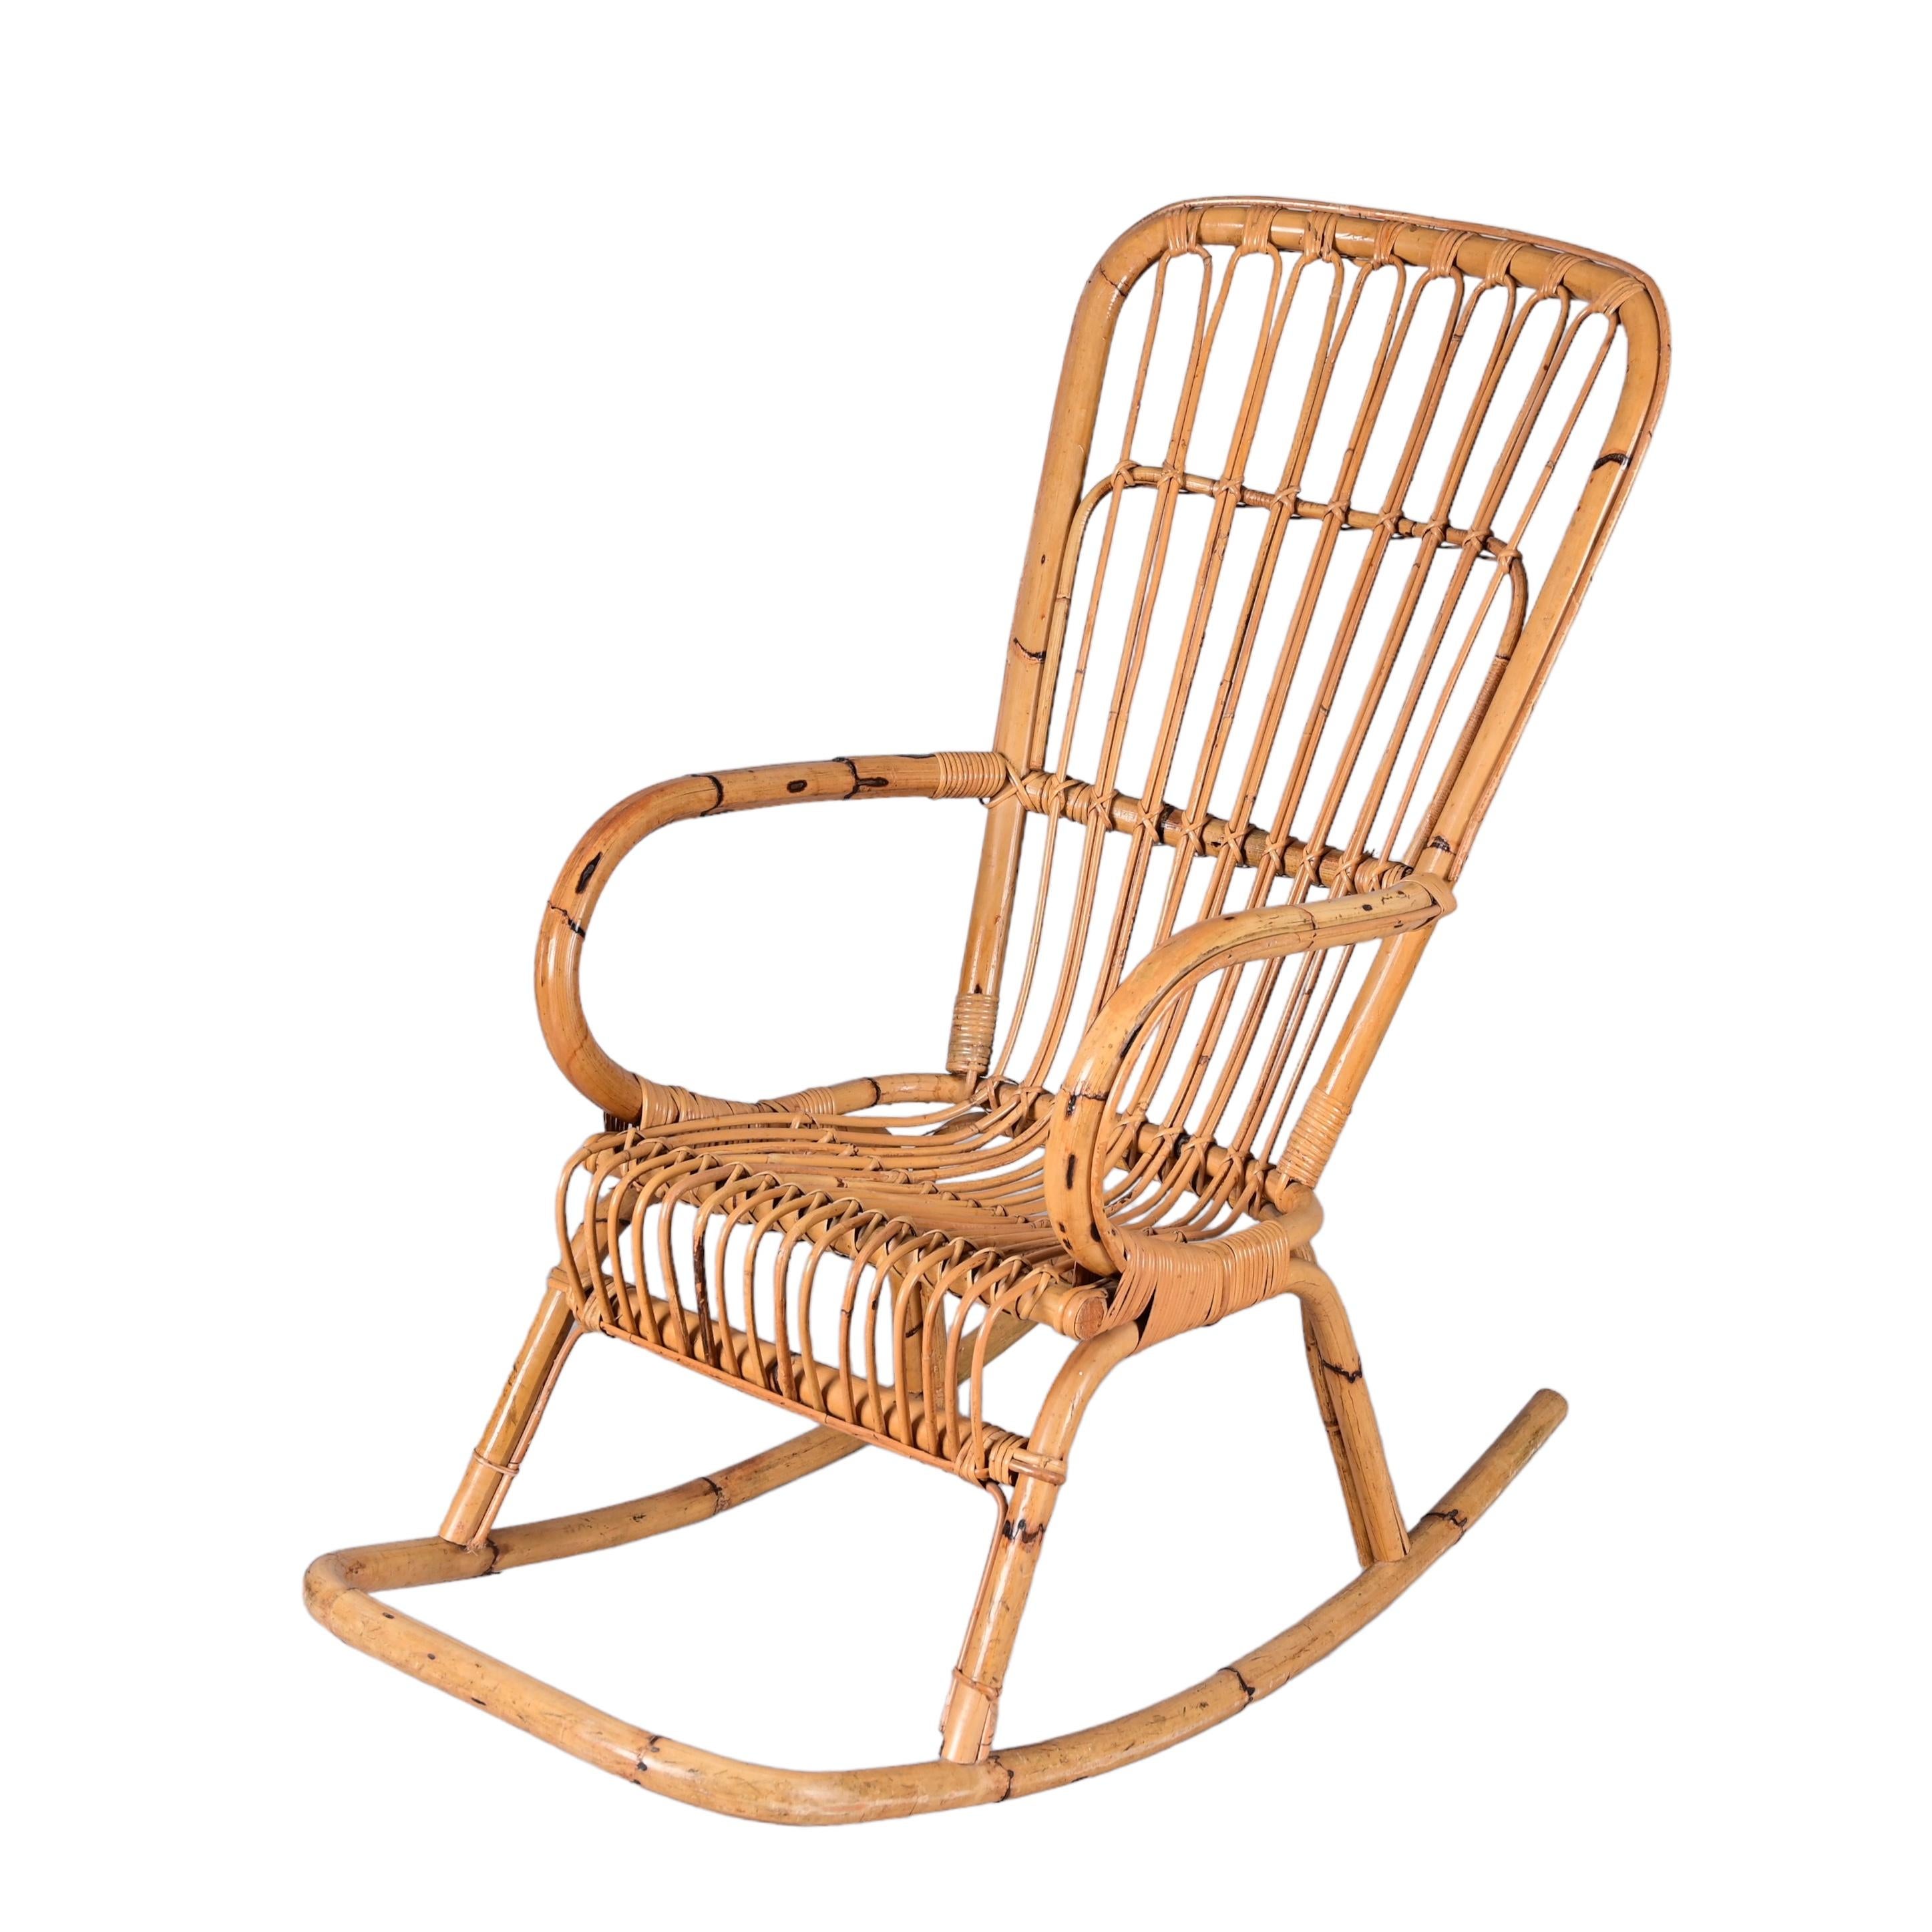 Elegant mid-century French Riviera rocking chair in rattan and bamboo. This fantastic piece was designed and manufactured in Italy during the 1970s.

This chair is unique because it has perfect proportions the structure, the seat and the bottom